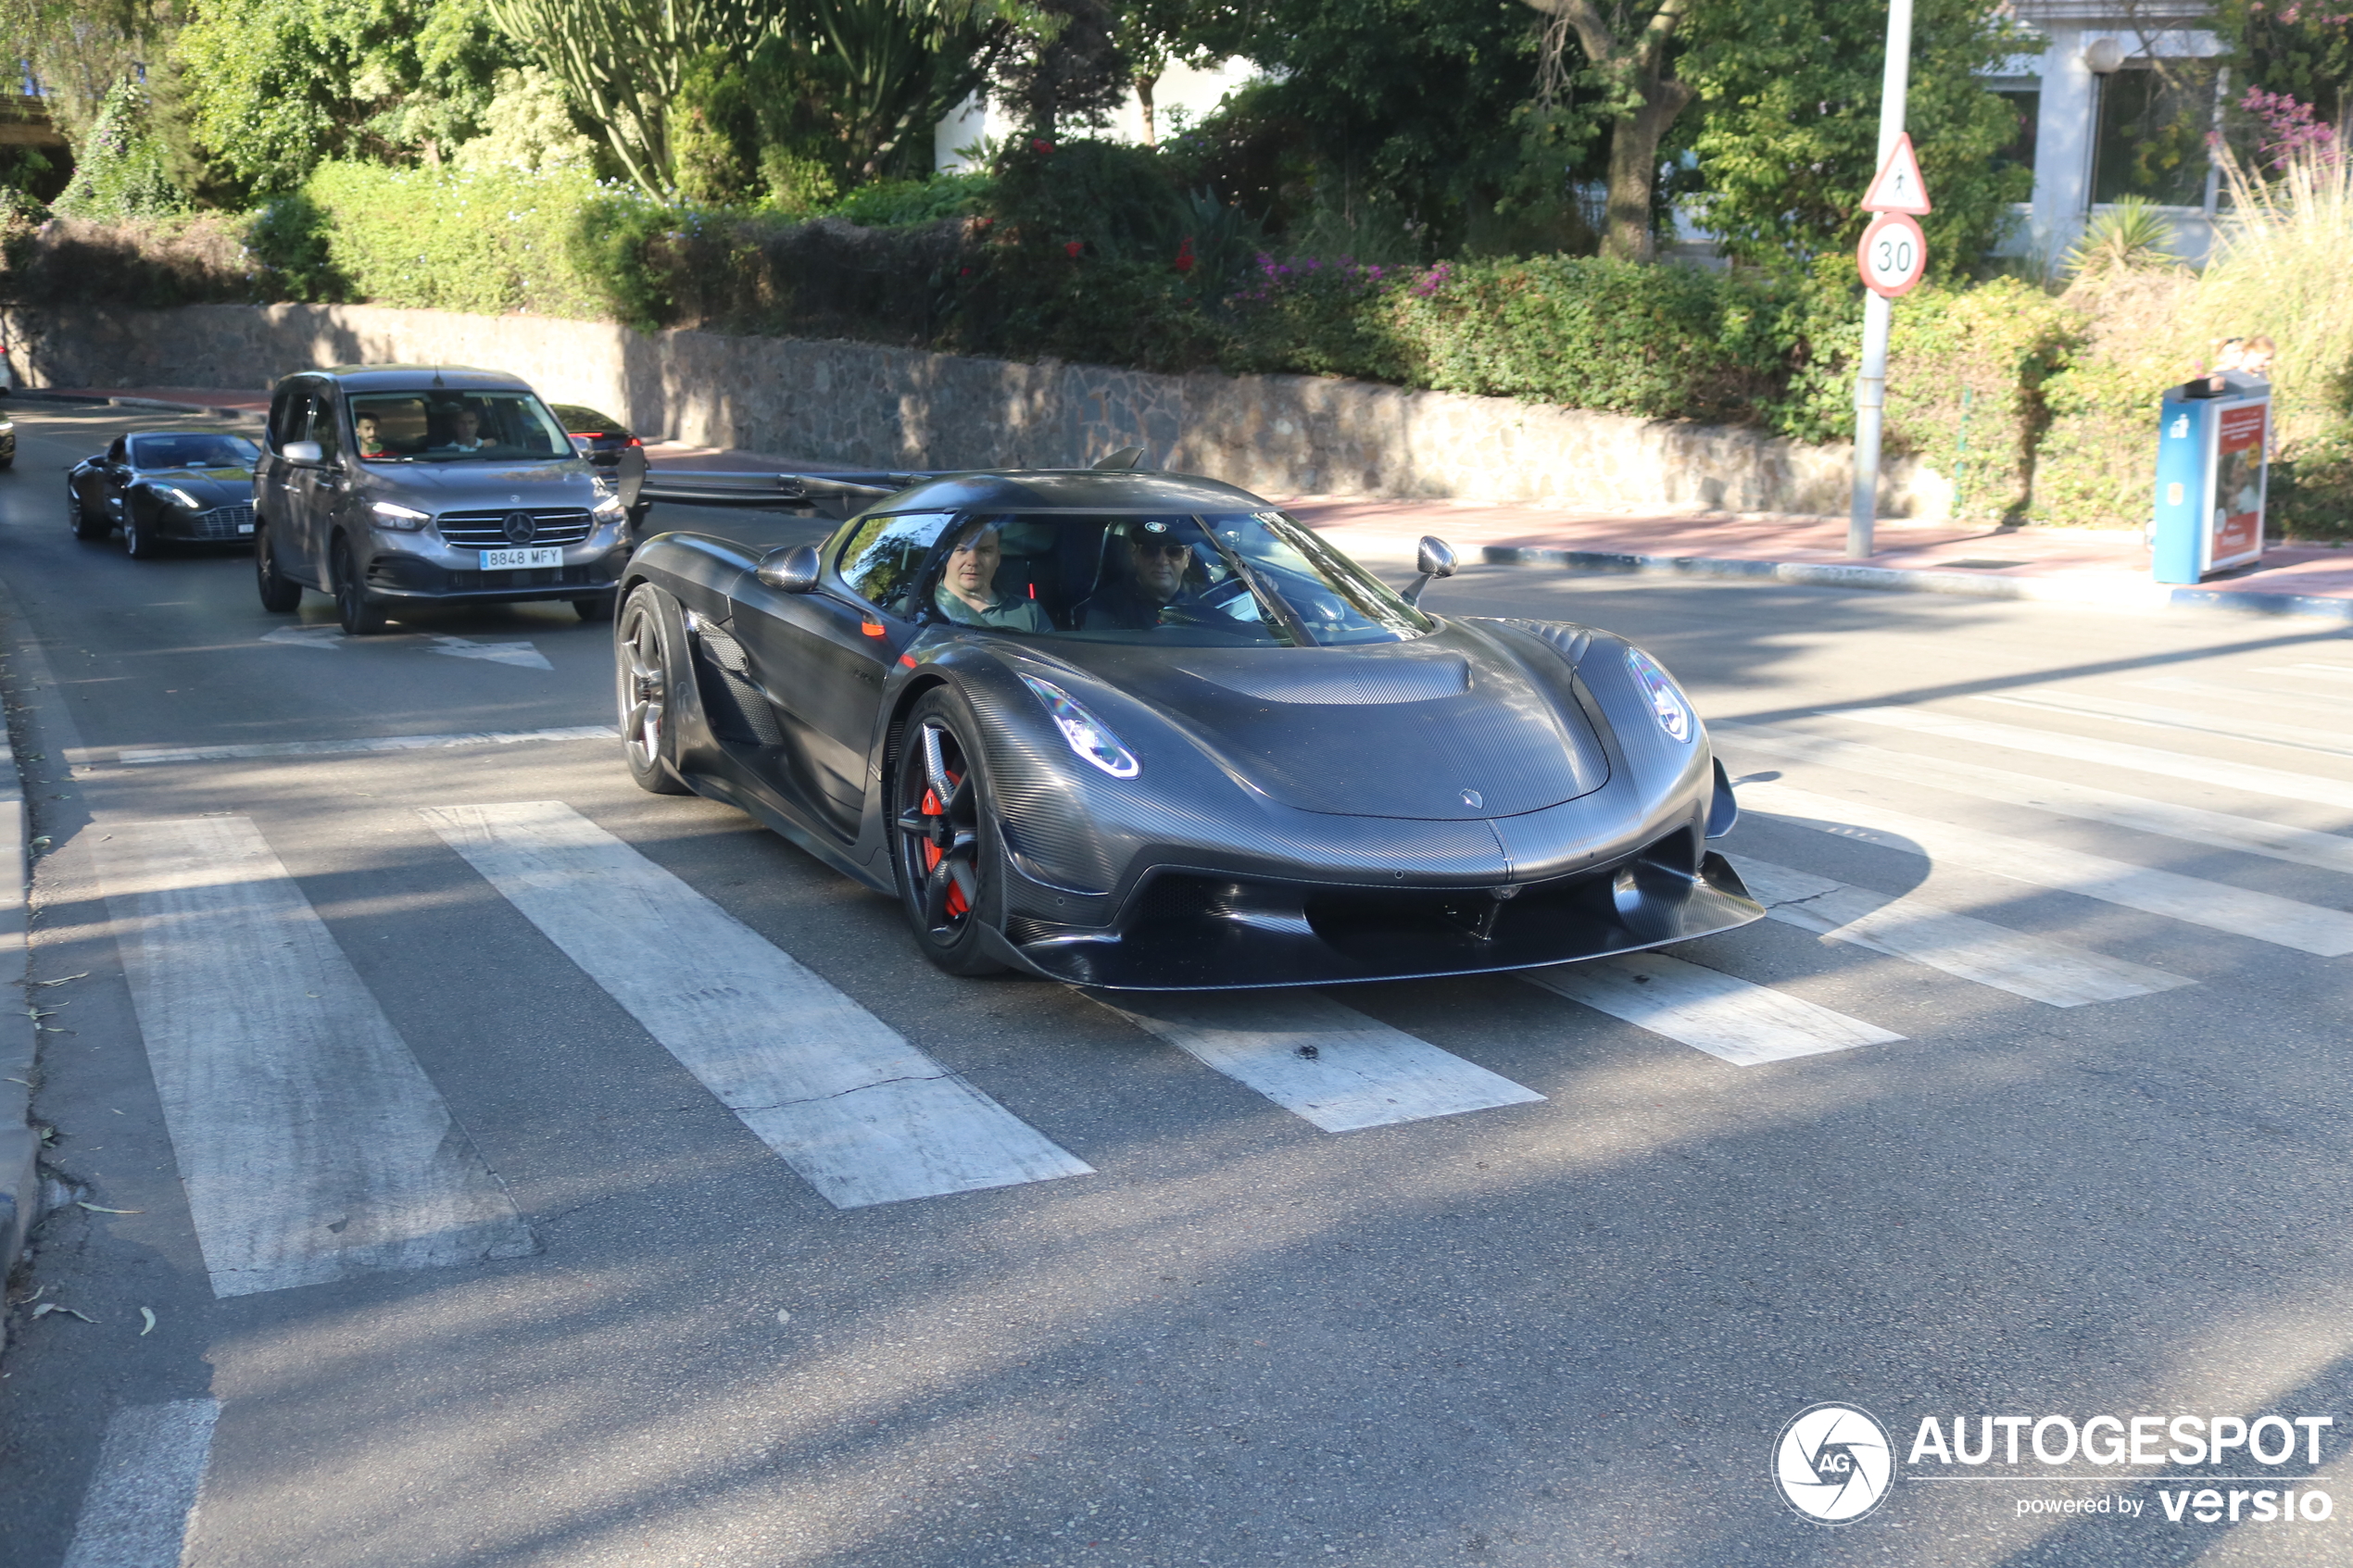 Another rarity appears in Marbella